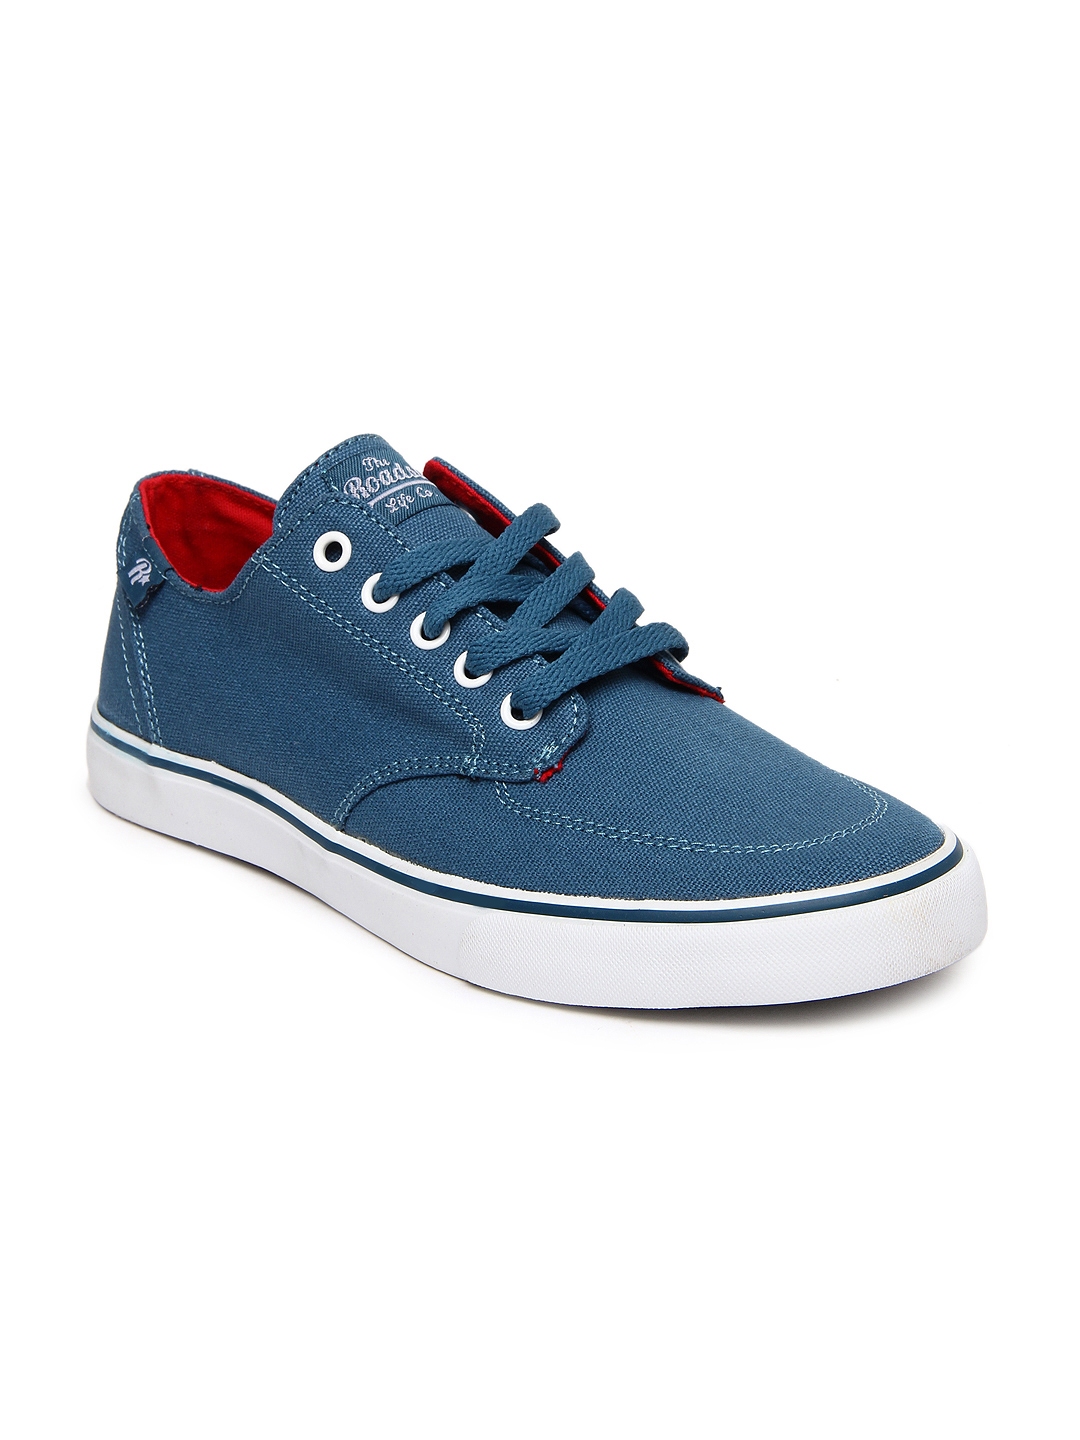 Buy Roadster Men Blue Casual Shoes - Casual Shoes for Men 388619 | Myntra